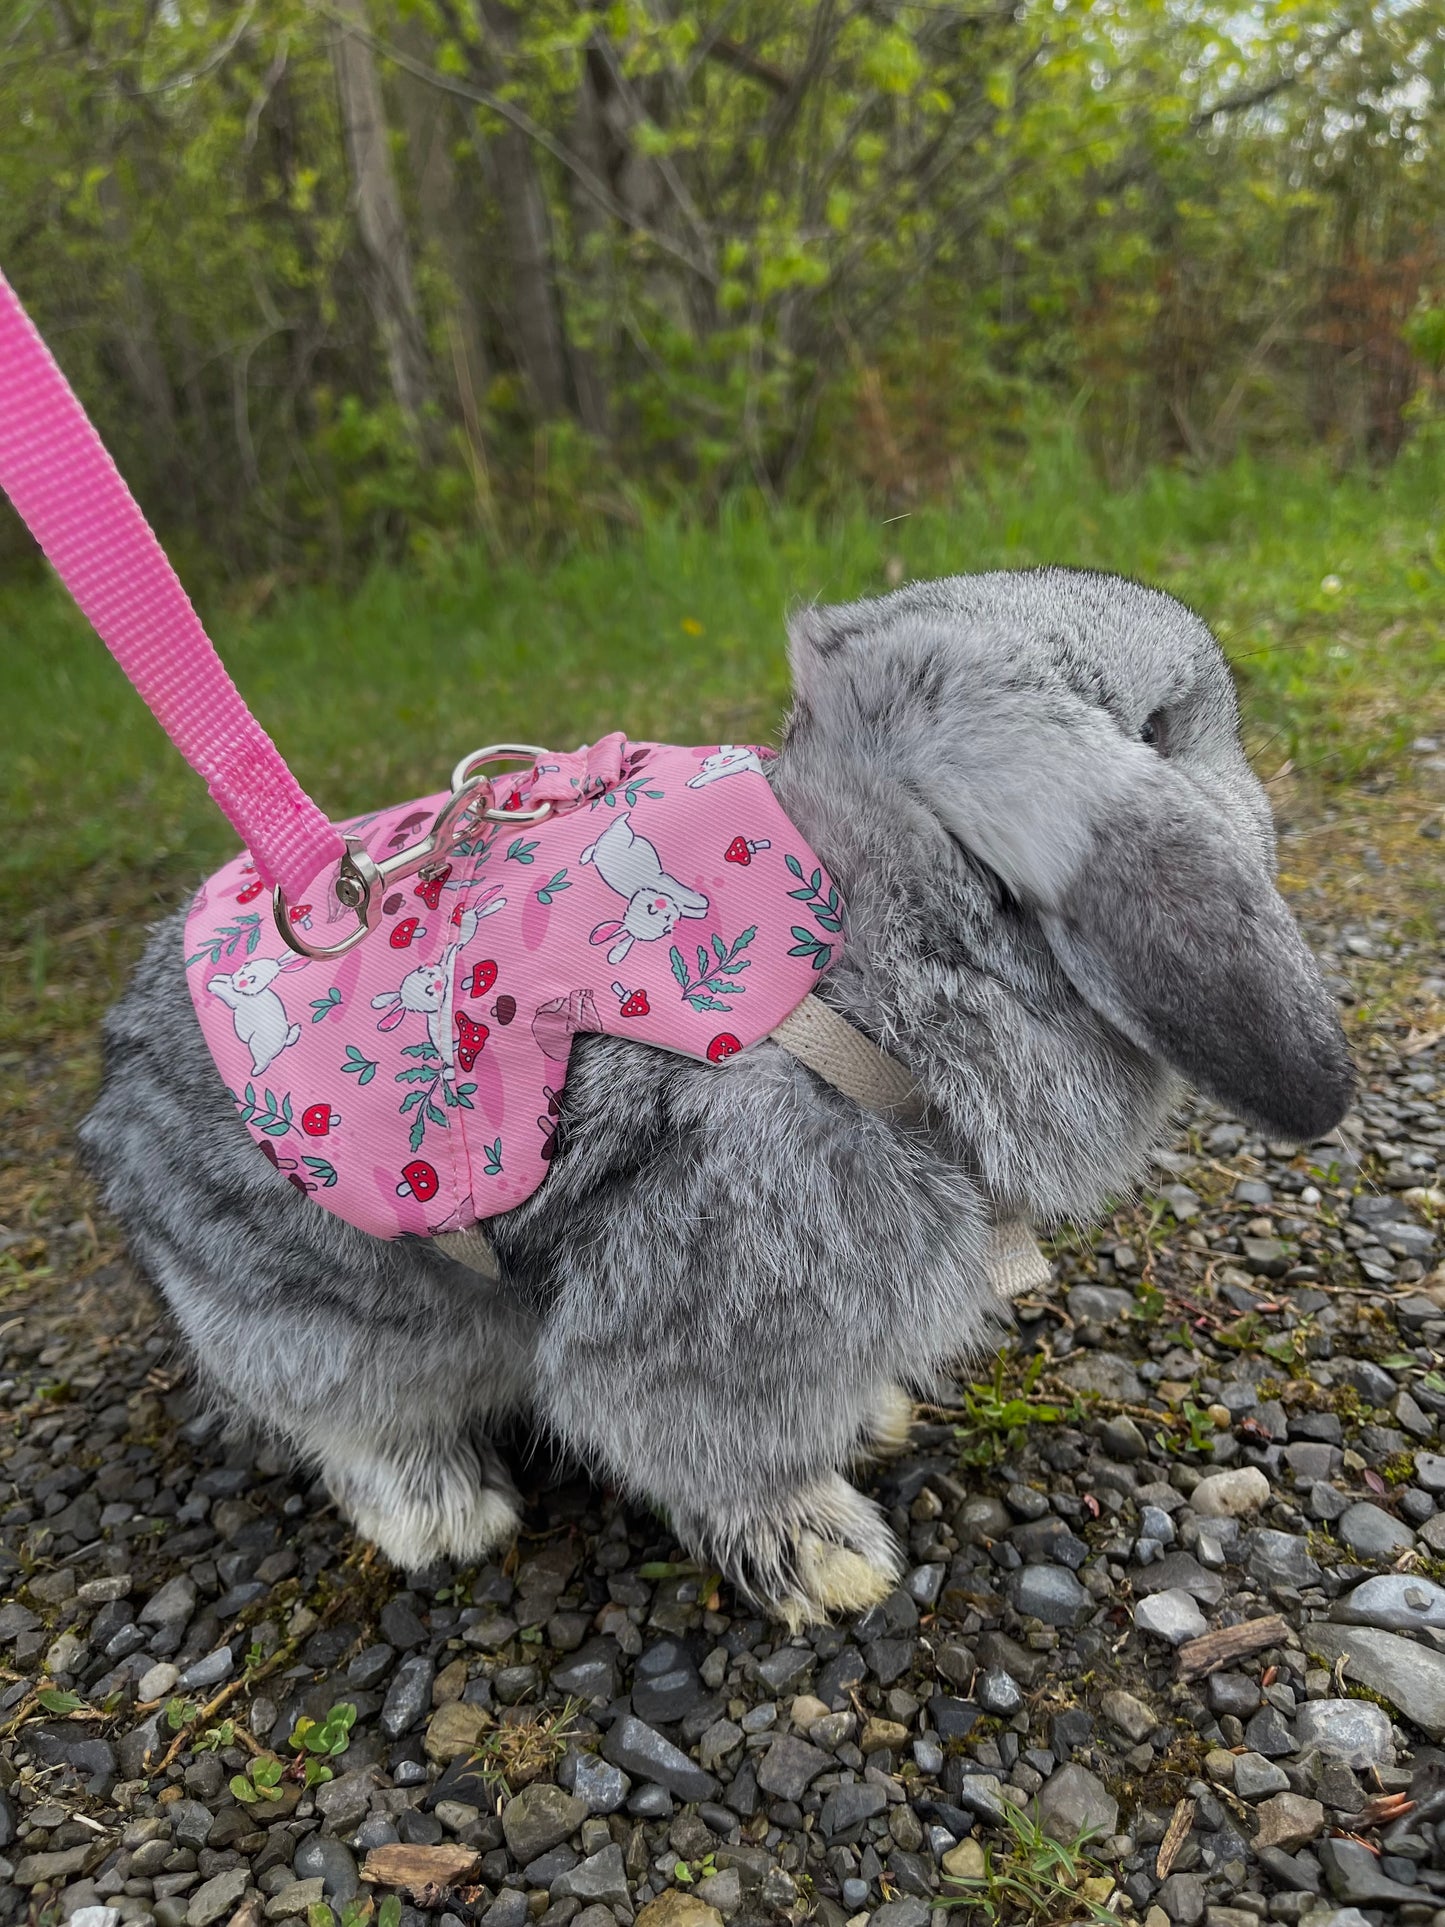 Bunny harness - walk in the forest